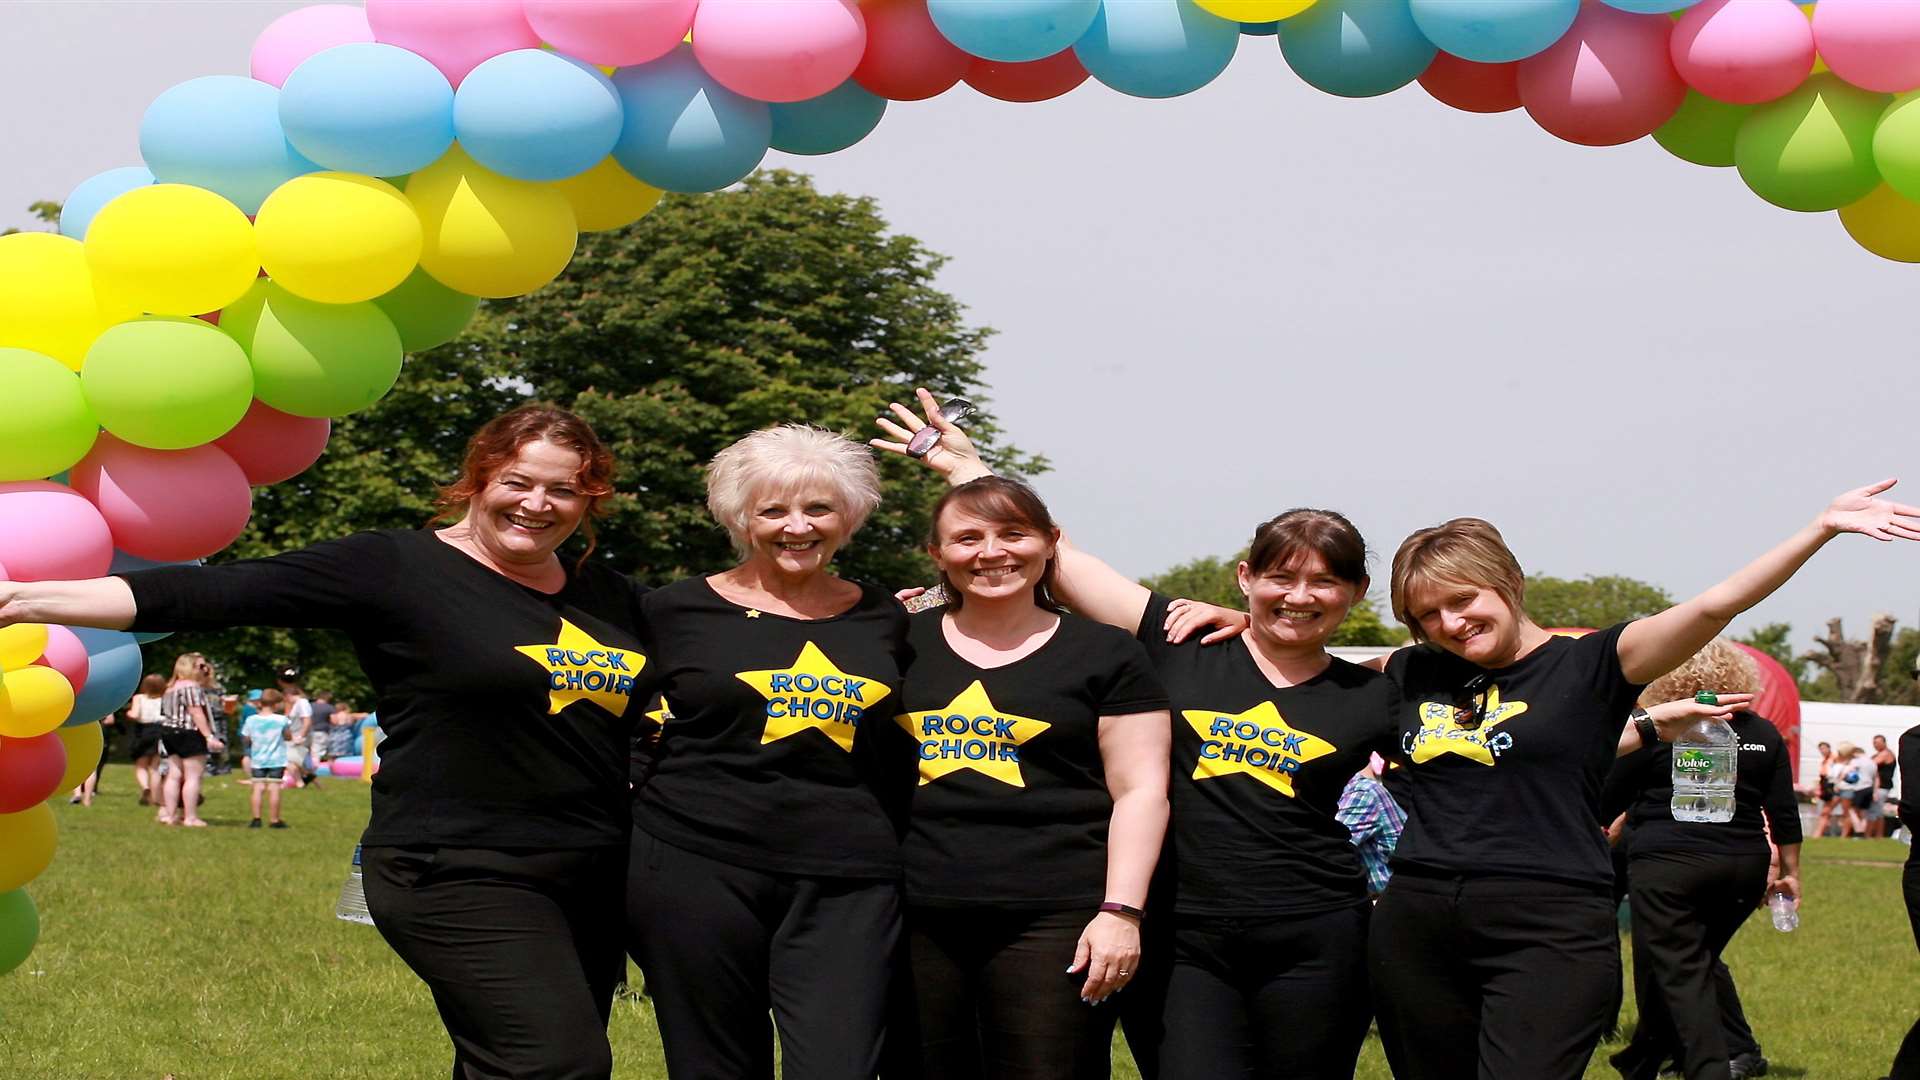 Left to right: Alison Ashford-Smith, Jane Avron-Cotton, Kirsty Slater, Sarah Gandon and Susanna Evans from the Rock Choir who performed at the funday